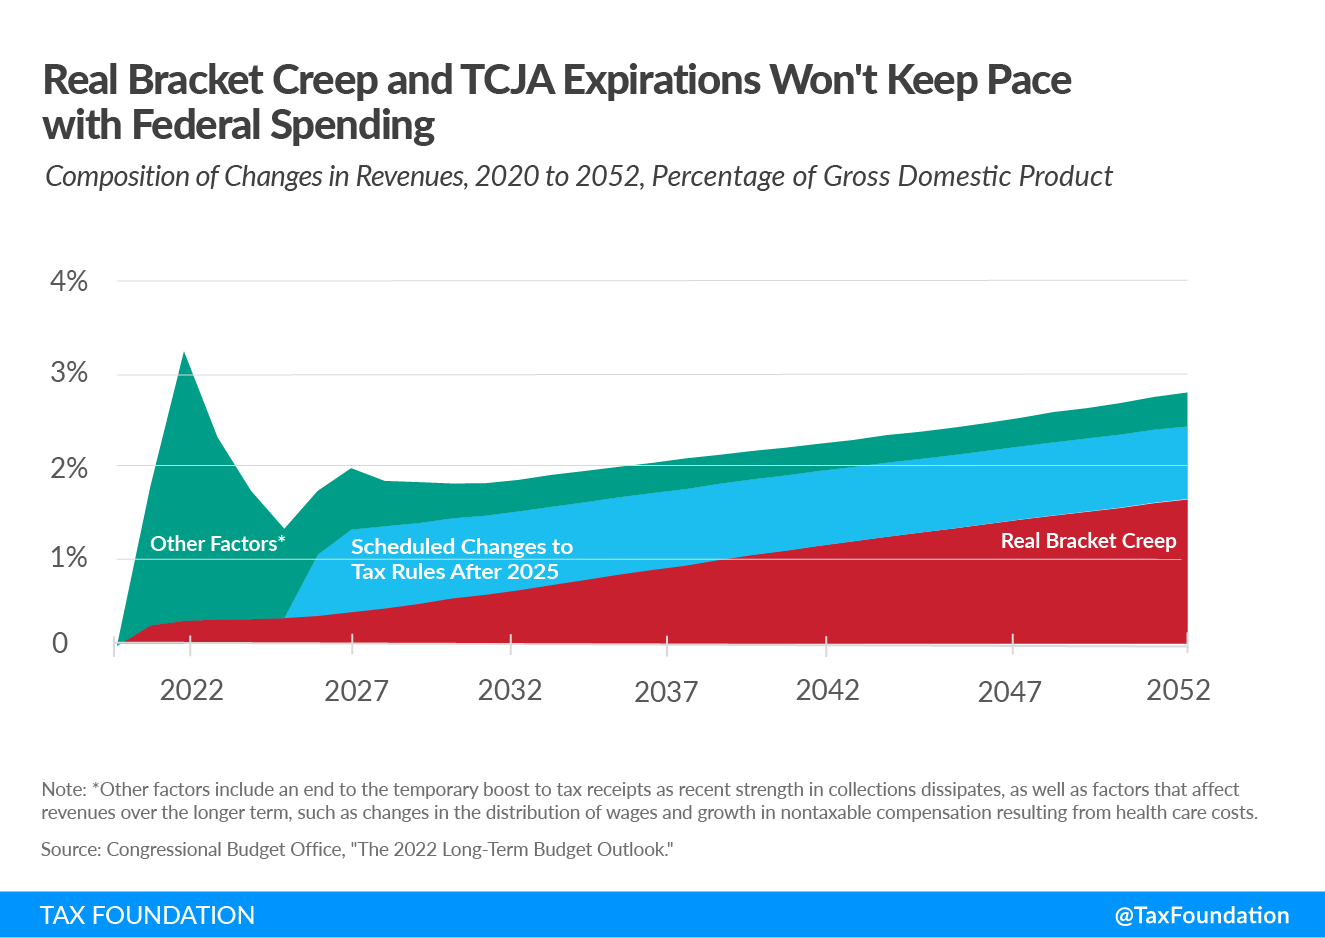 Real bracket creep and TCJA expirations won't keep pace with federal spending CBO long-term budget outlook federal deficit